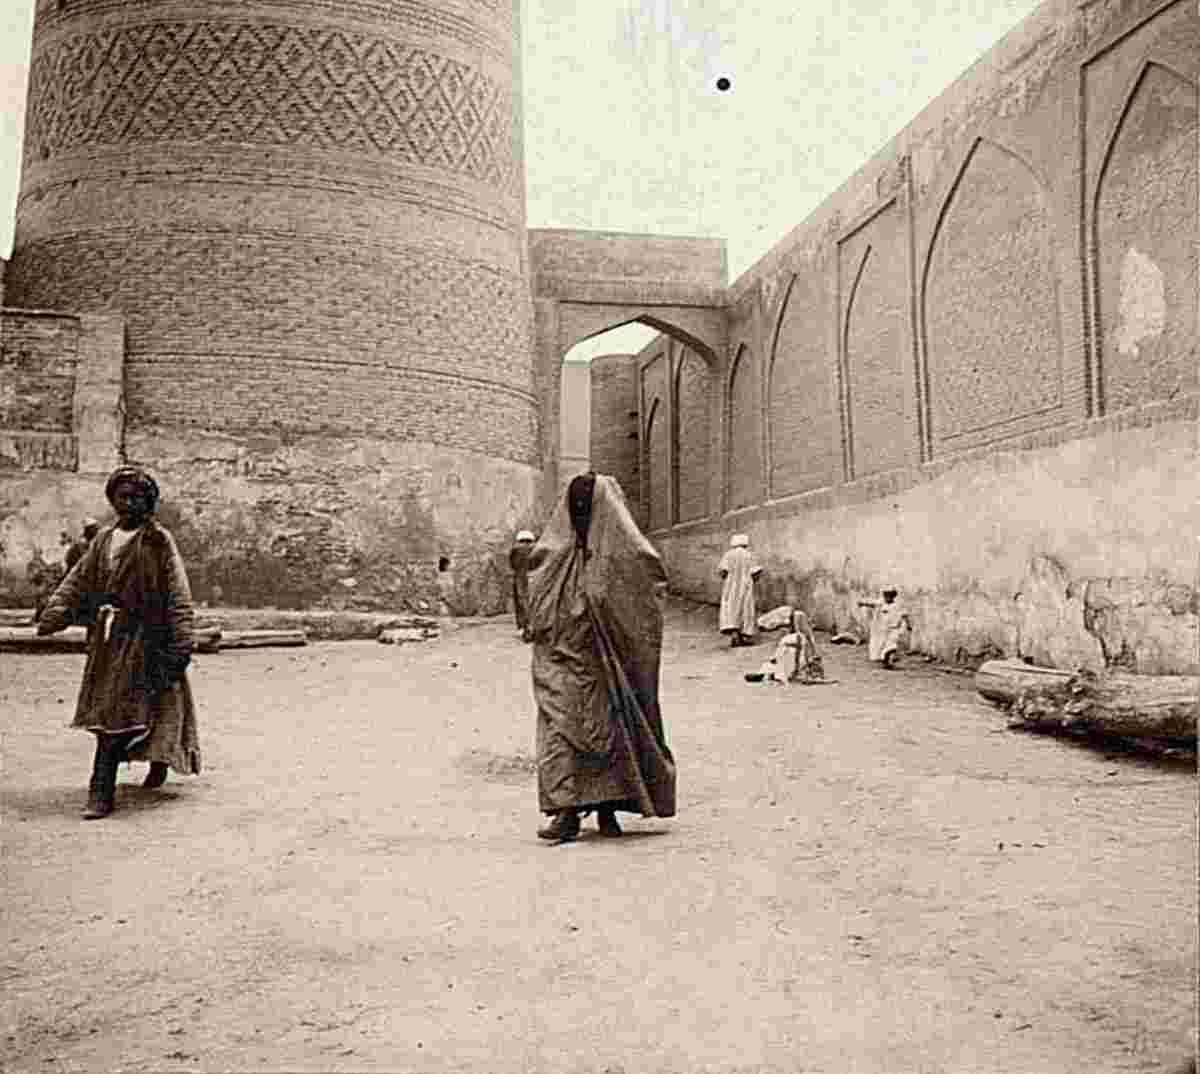 Bukhara. Street near the cathedral mosque Kalyan